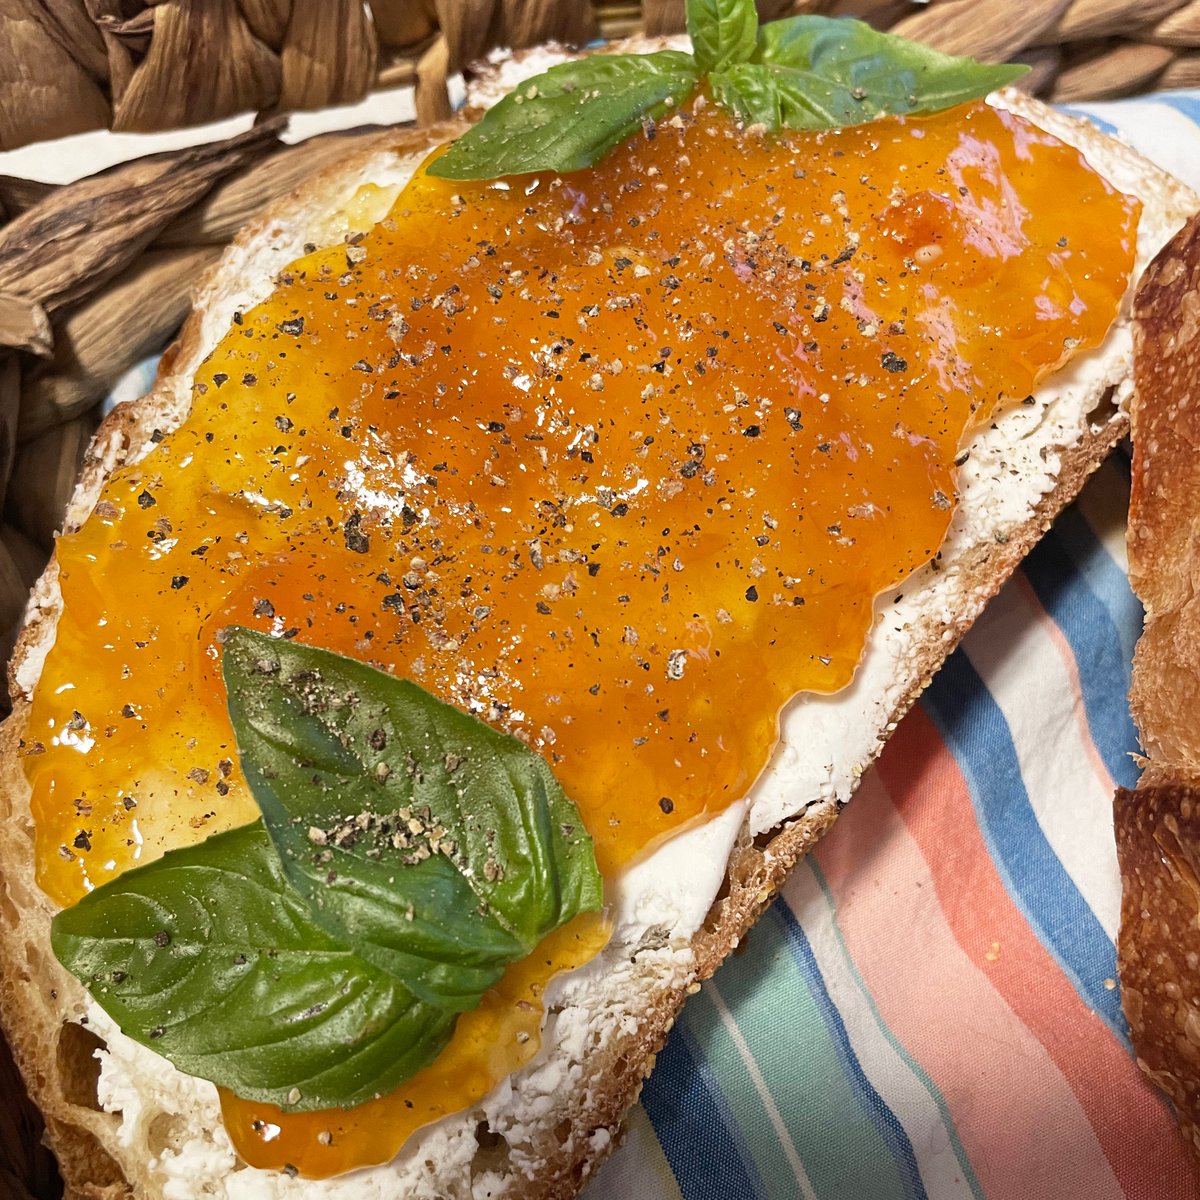 What do you spread on our sourdough bread? Maybe goat cheese and apricot jam with a little fresh basil and black pepper? Let us know your favorite!
#oldehearthbread #freshbread #shoplocal #orlandoflorida #sourdough
#artisanbakery #breadlife